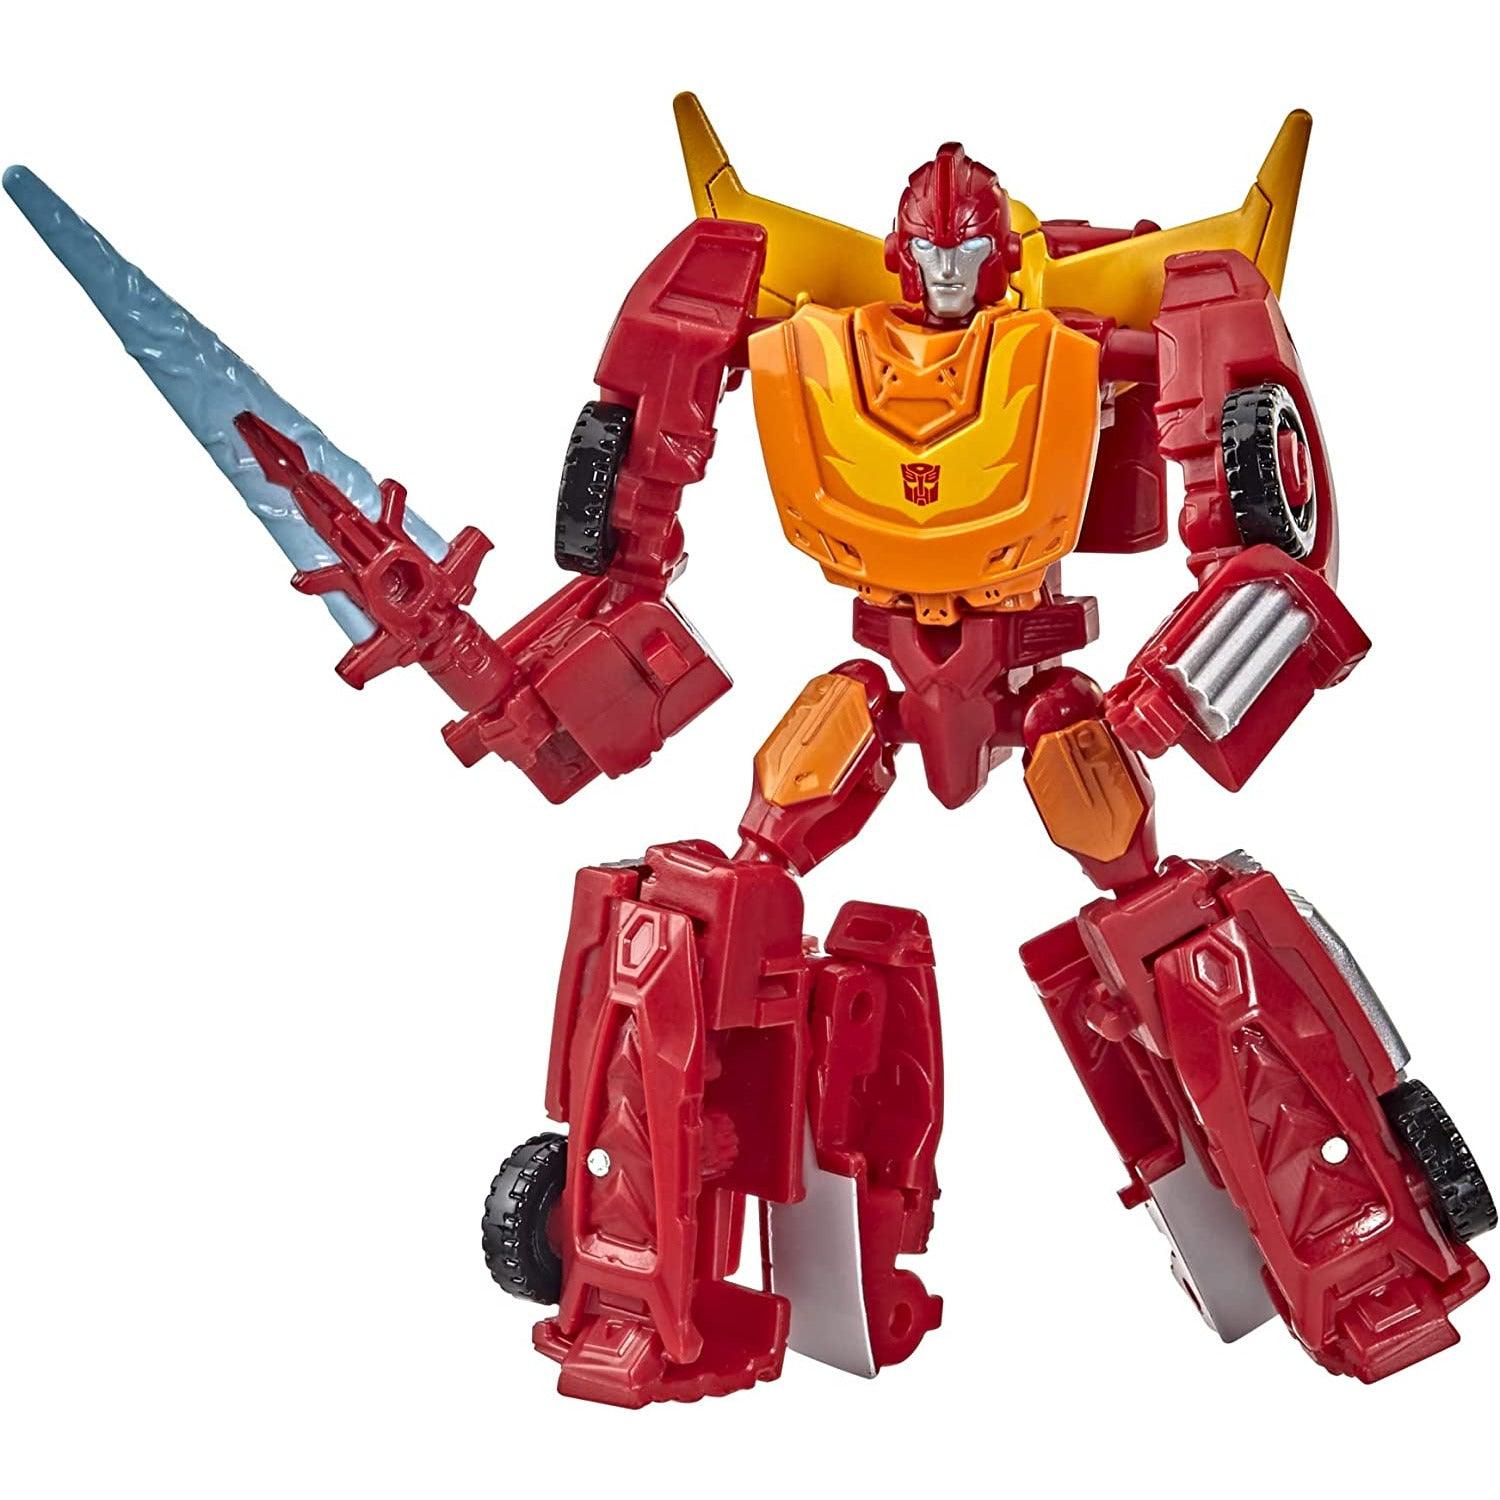 Transformers Toys Generations War for Cybertron: Kingdom Core Class WFC-K43 Autobot Hot Rod Action Figure